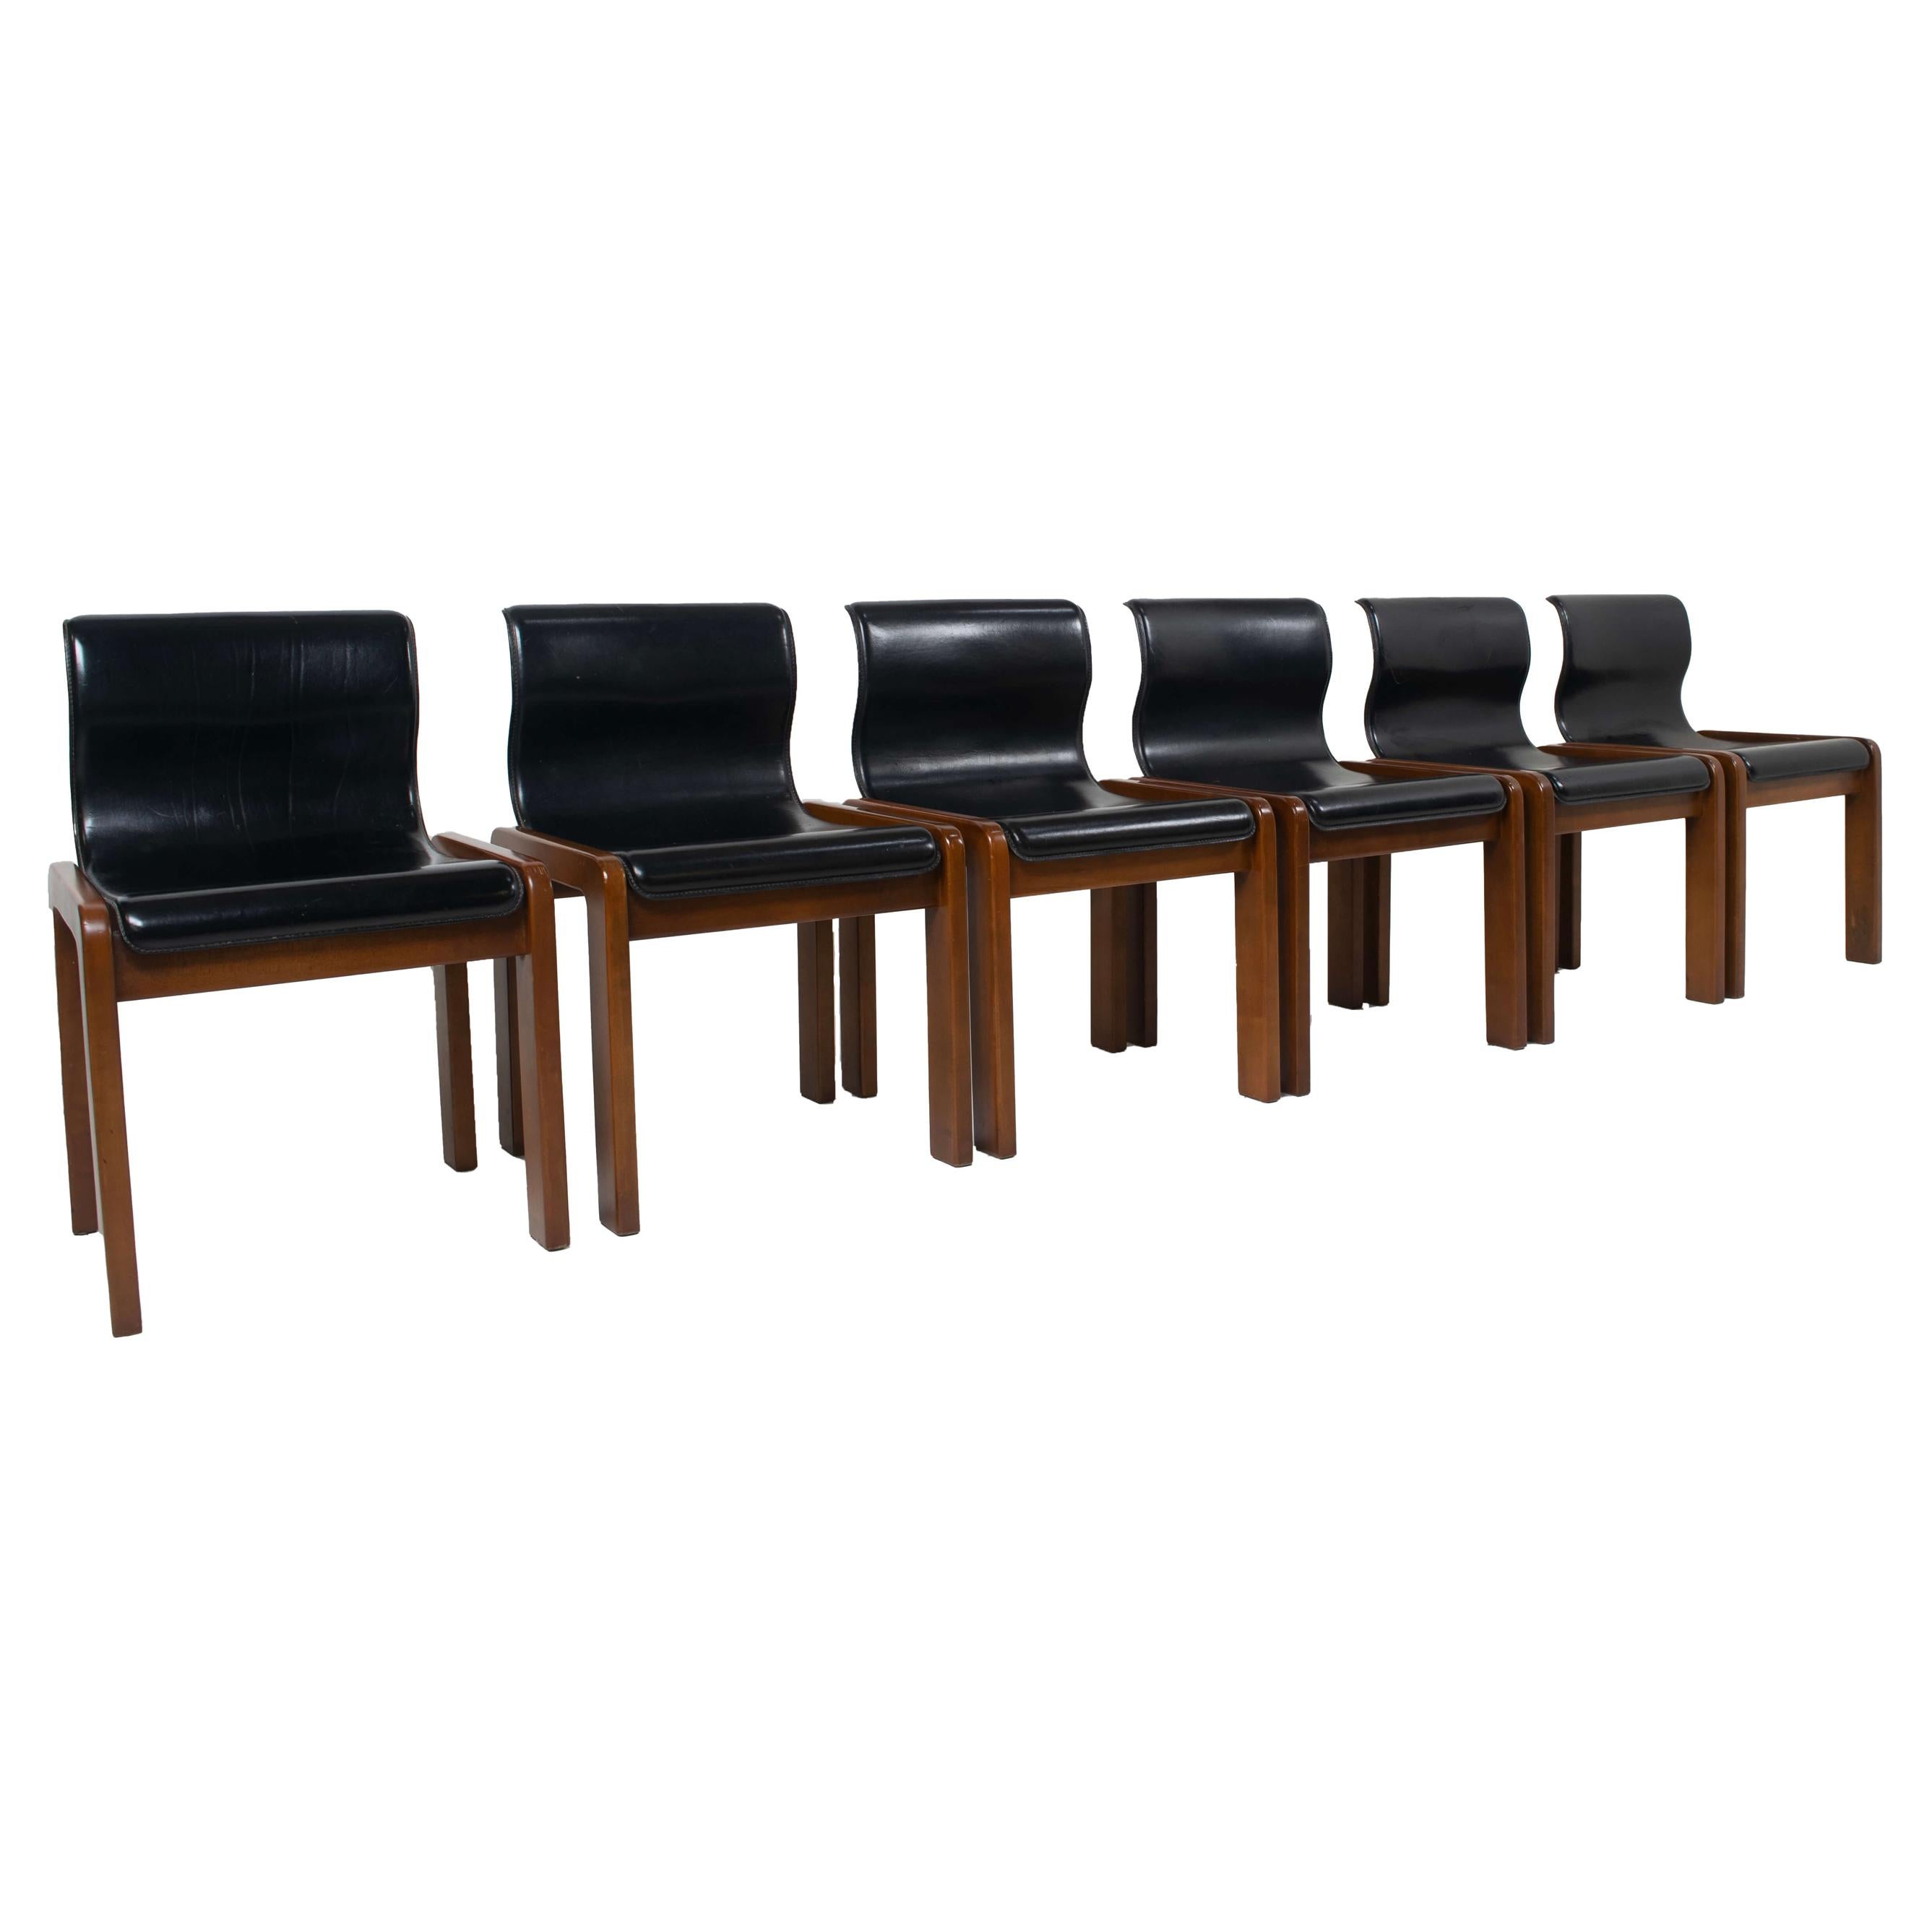 Six Afra & Tobia Scarpa Midcentury Leather and Plywood Dining Chairs, Italy